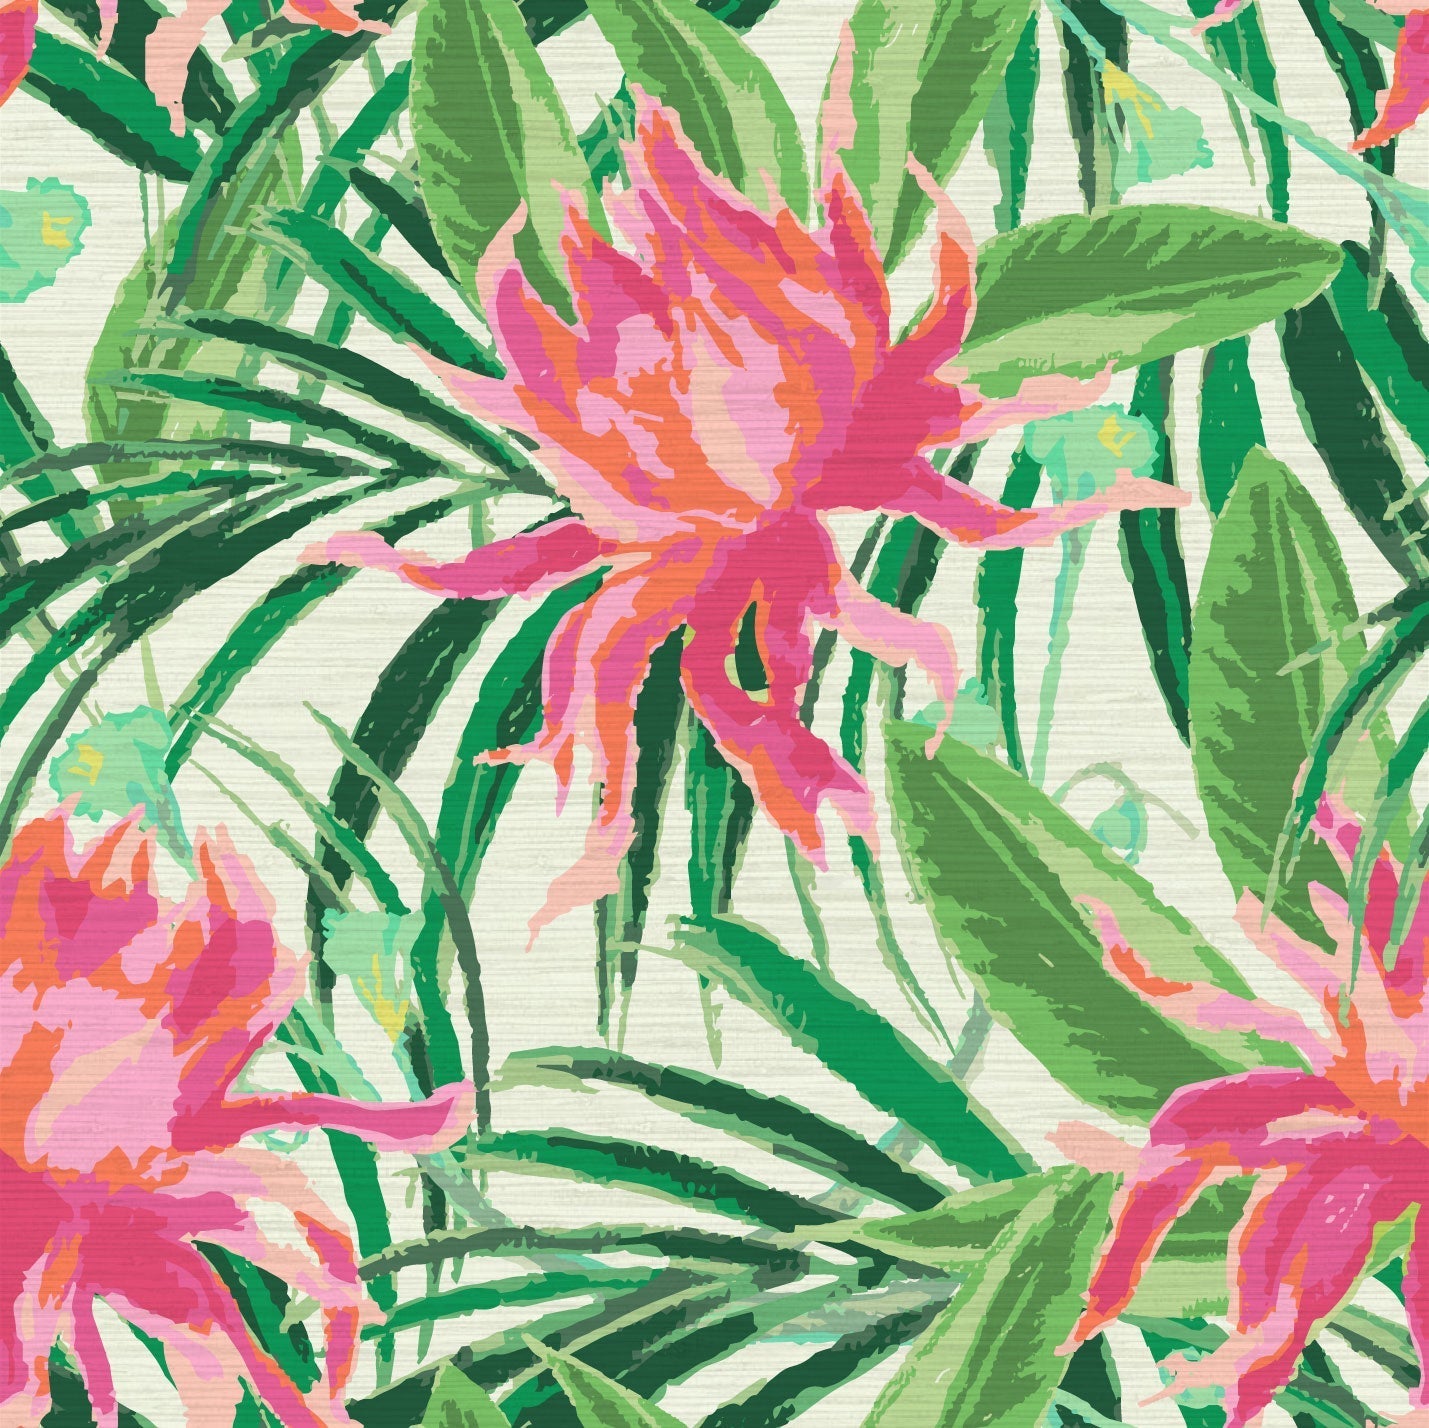 grasscloth wallpaper with cream based featuring oversized painterly tropical flowers and palm leafs in striking shades of pink and orange and leafs in shades of bright green Natural Textured Eco-Friendly Non-toxic High-quality Sustainable Interior Design Bold Custom Tailor-made Retro chic Tropical Jungle Coastal preppy Garden Seaside Coastal Seashore Waterfront Vacation home styling Retreat Relaxed beach vibes Beach cottage Shoreline Oceanfront botanical palm leaf